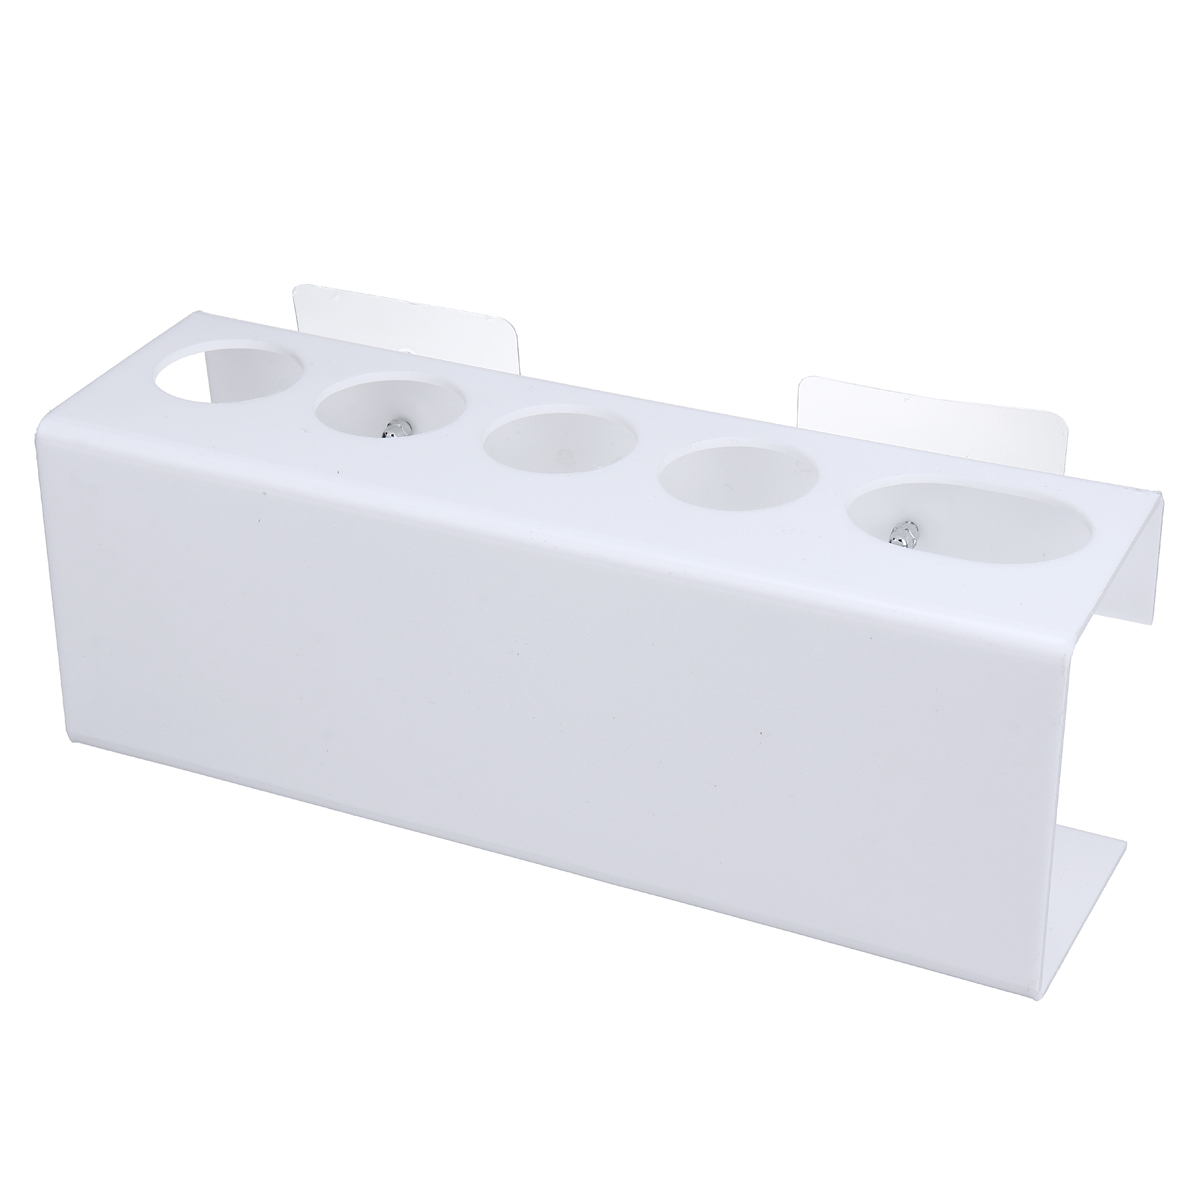 1PCS-Wall-Mounted-Electric-Toothbrush-Holder-Toothpaste-Holder-Bathroom-Organizer-Detachable-Bathroo-1738124-4